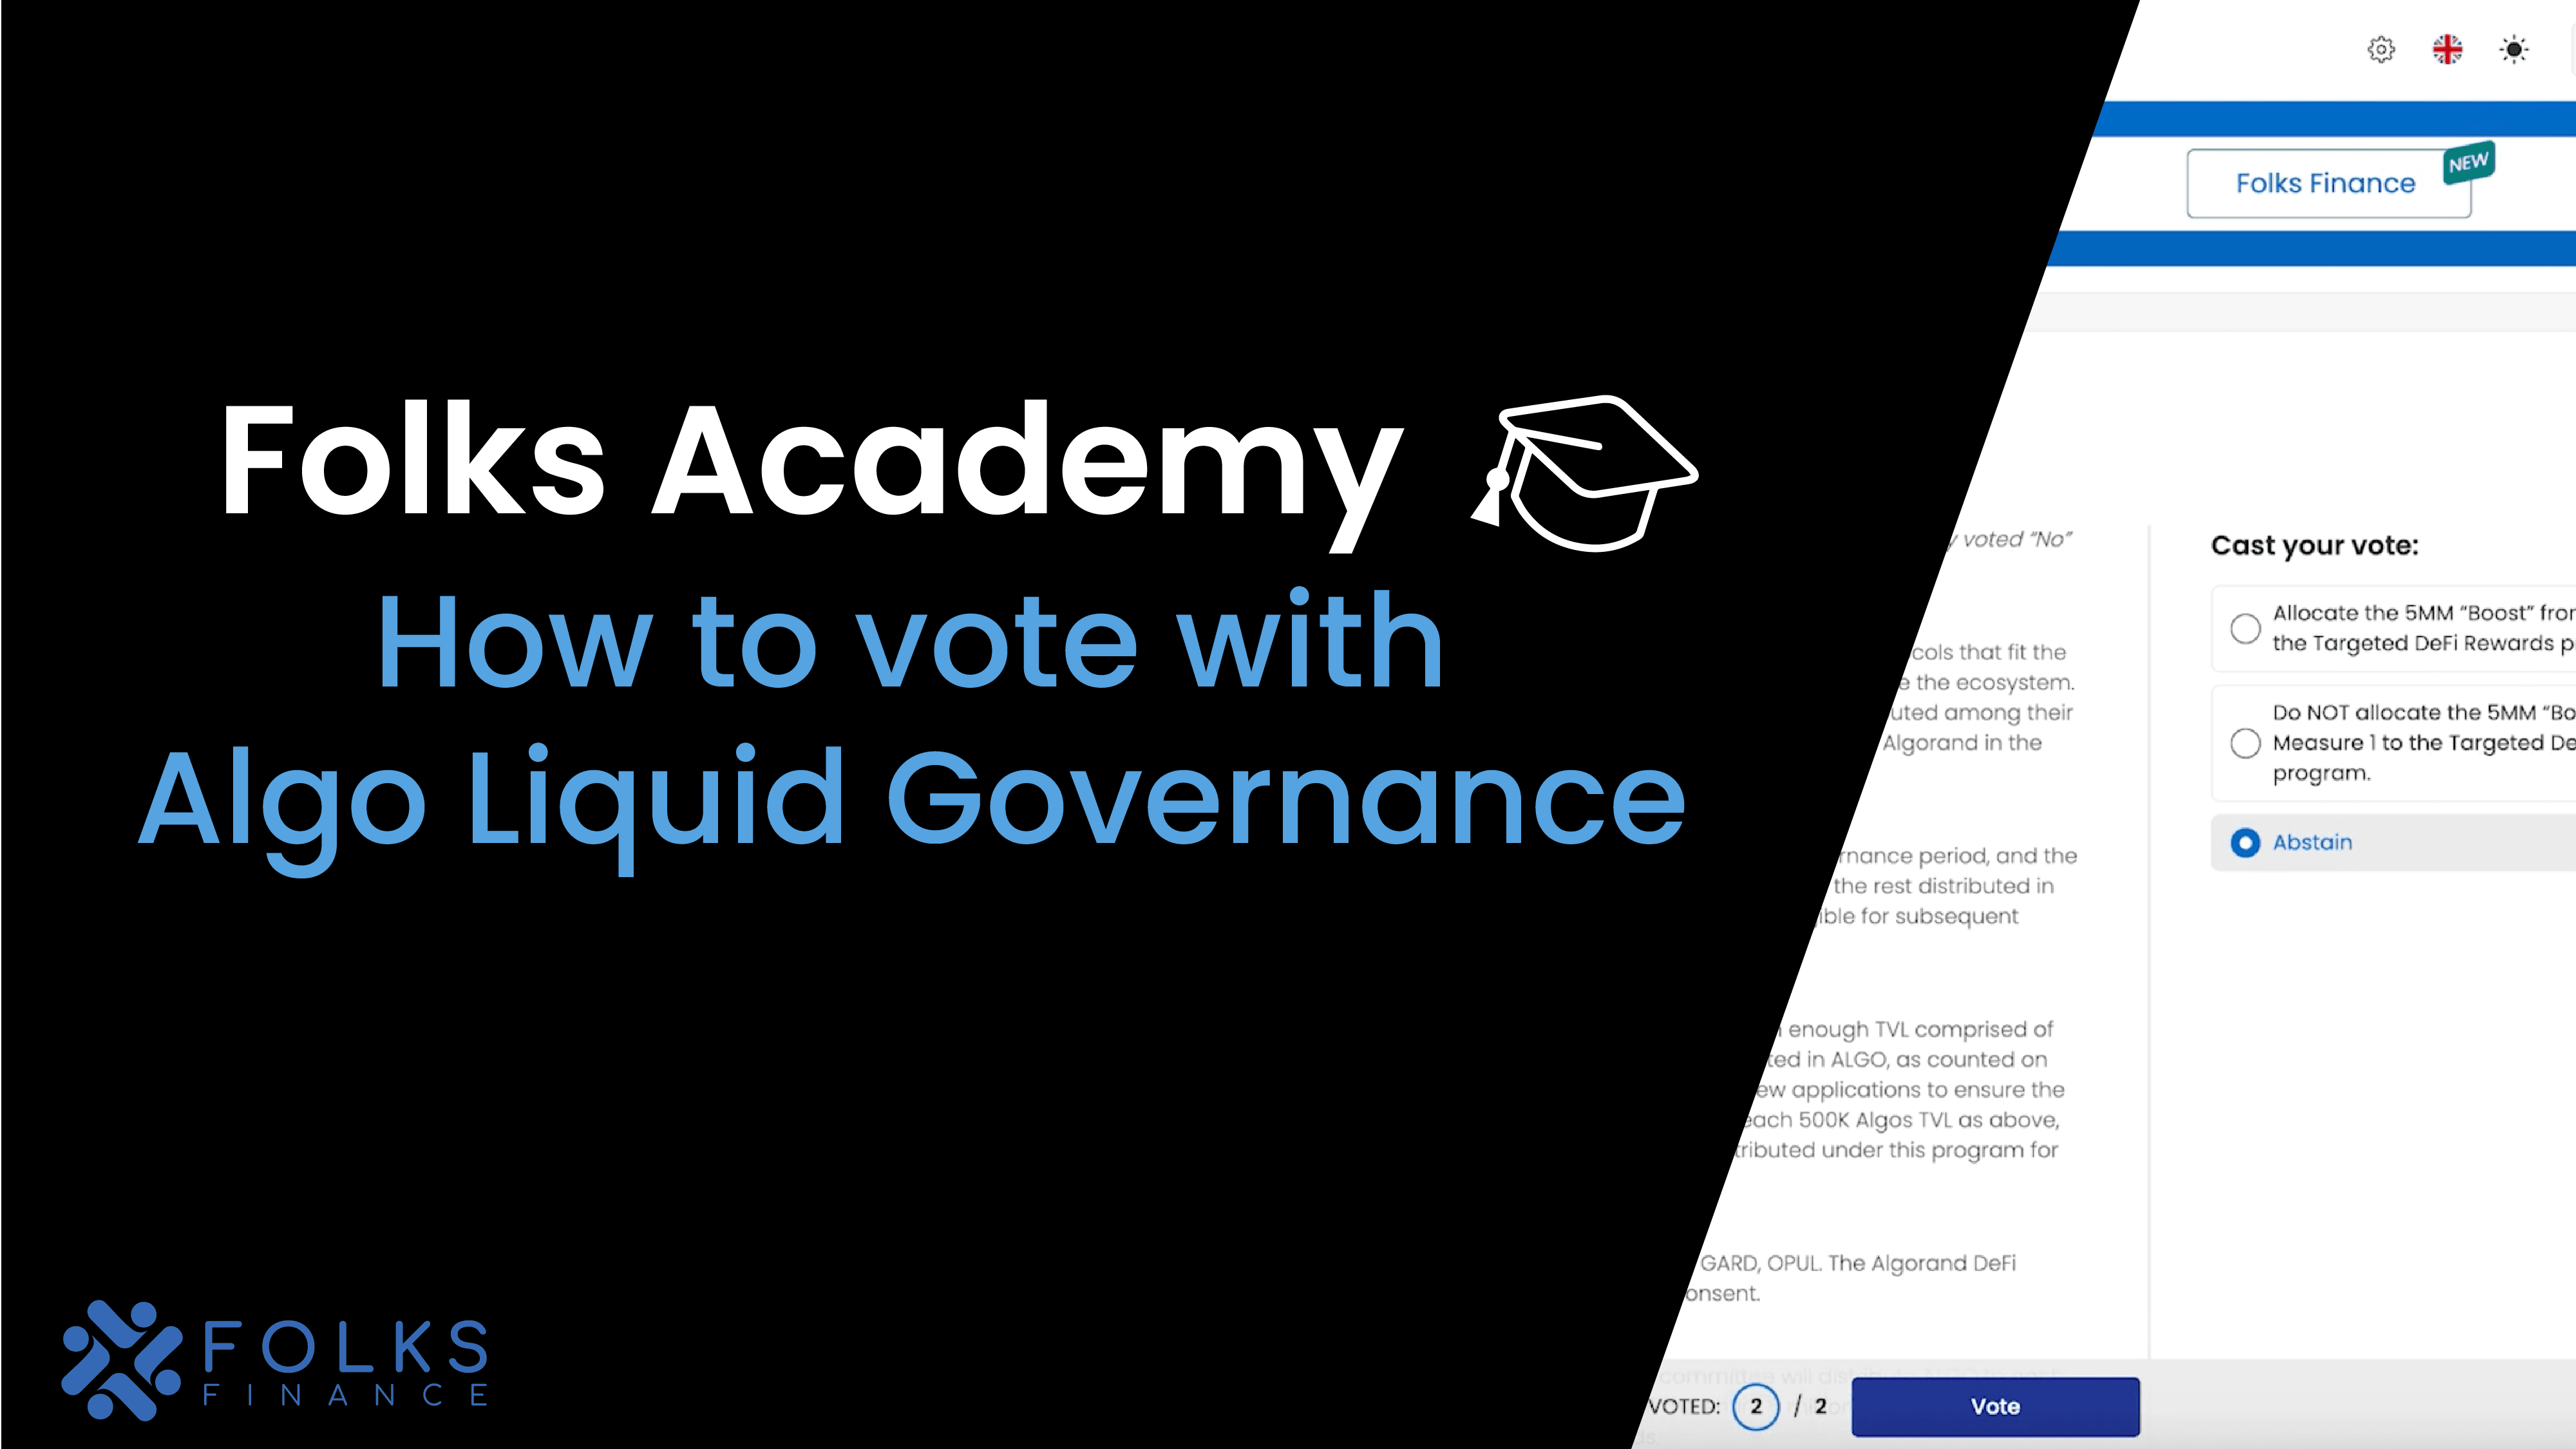 How to Vote with Liquid Governance